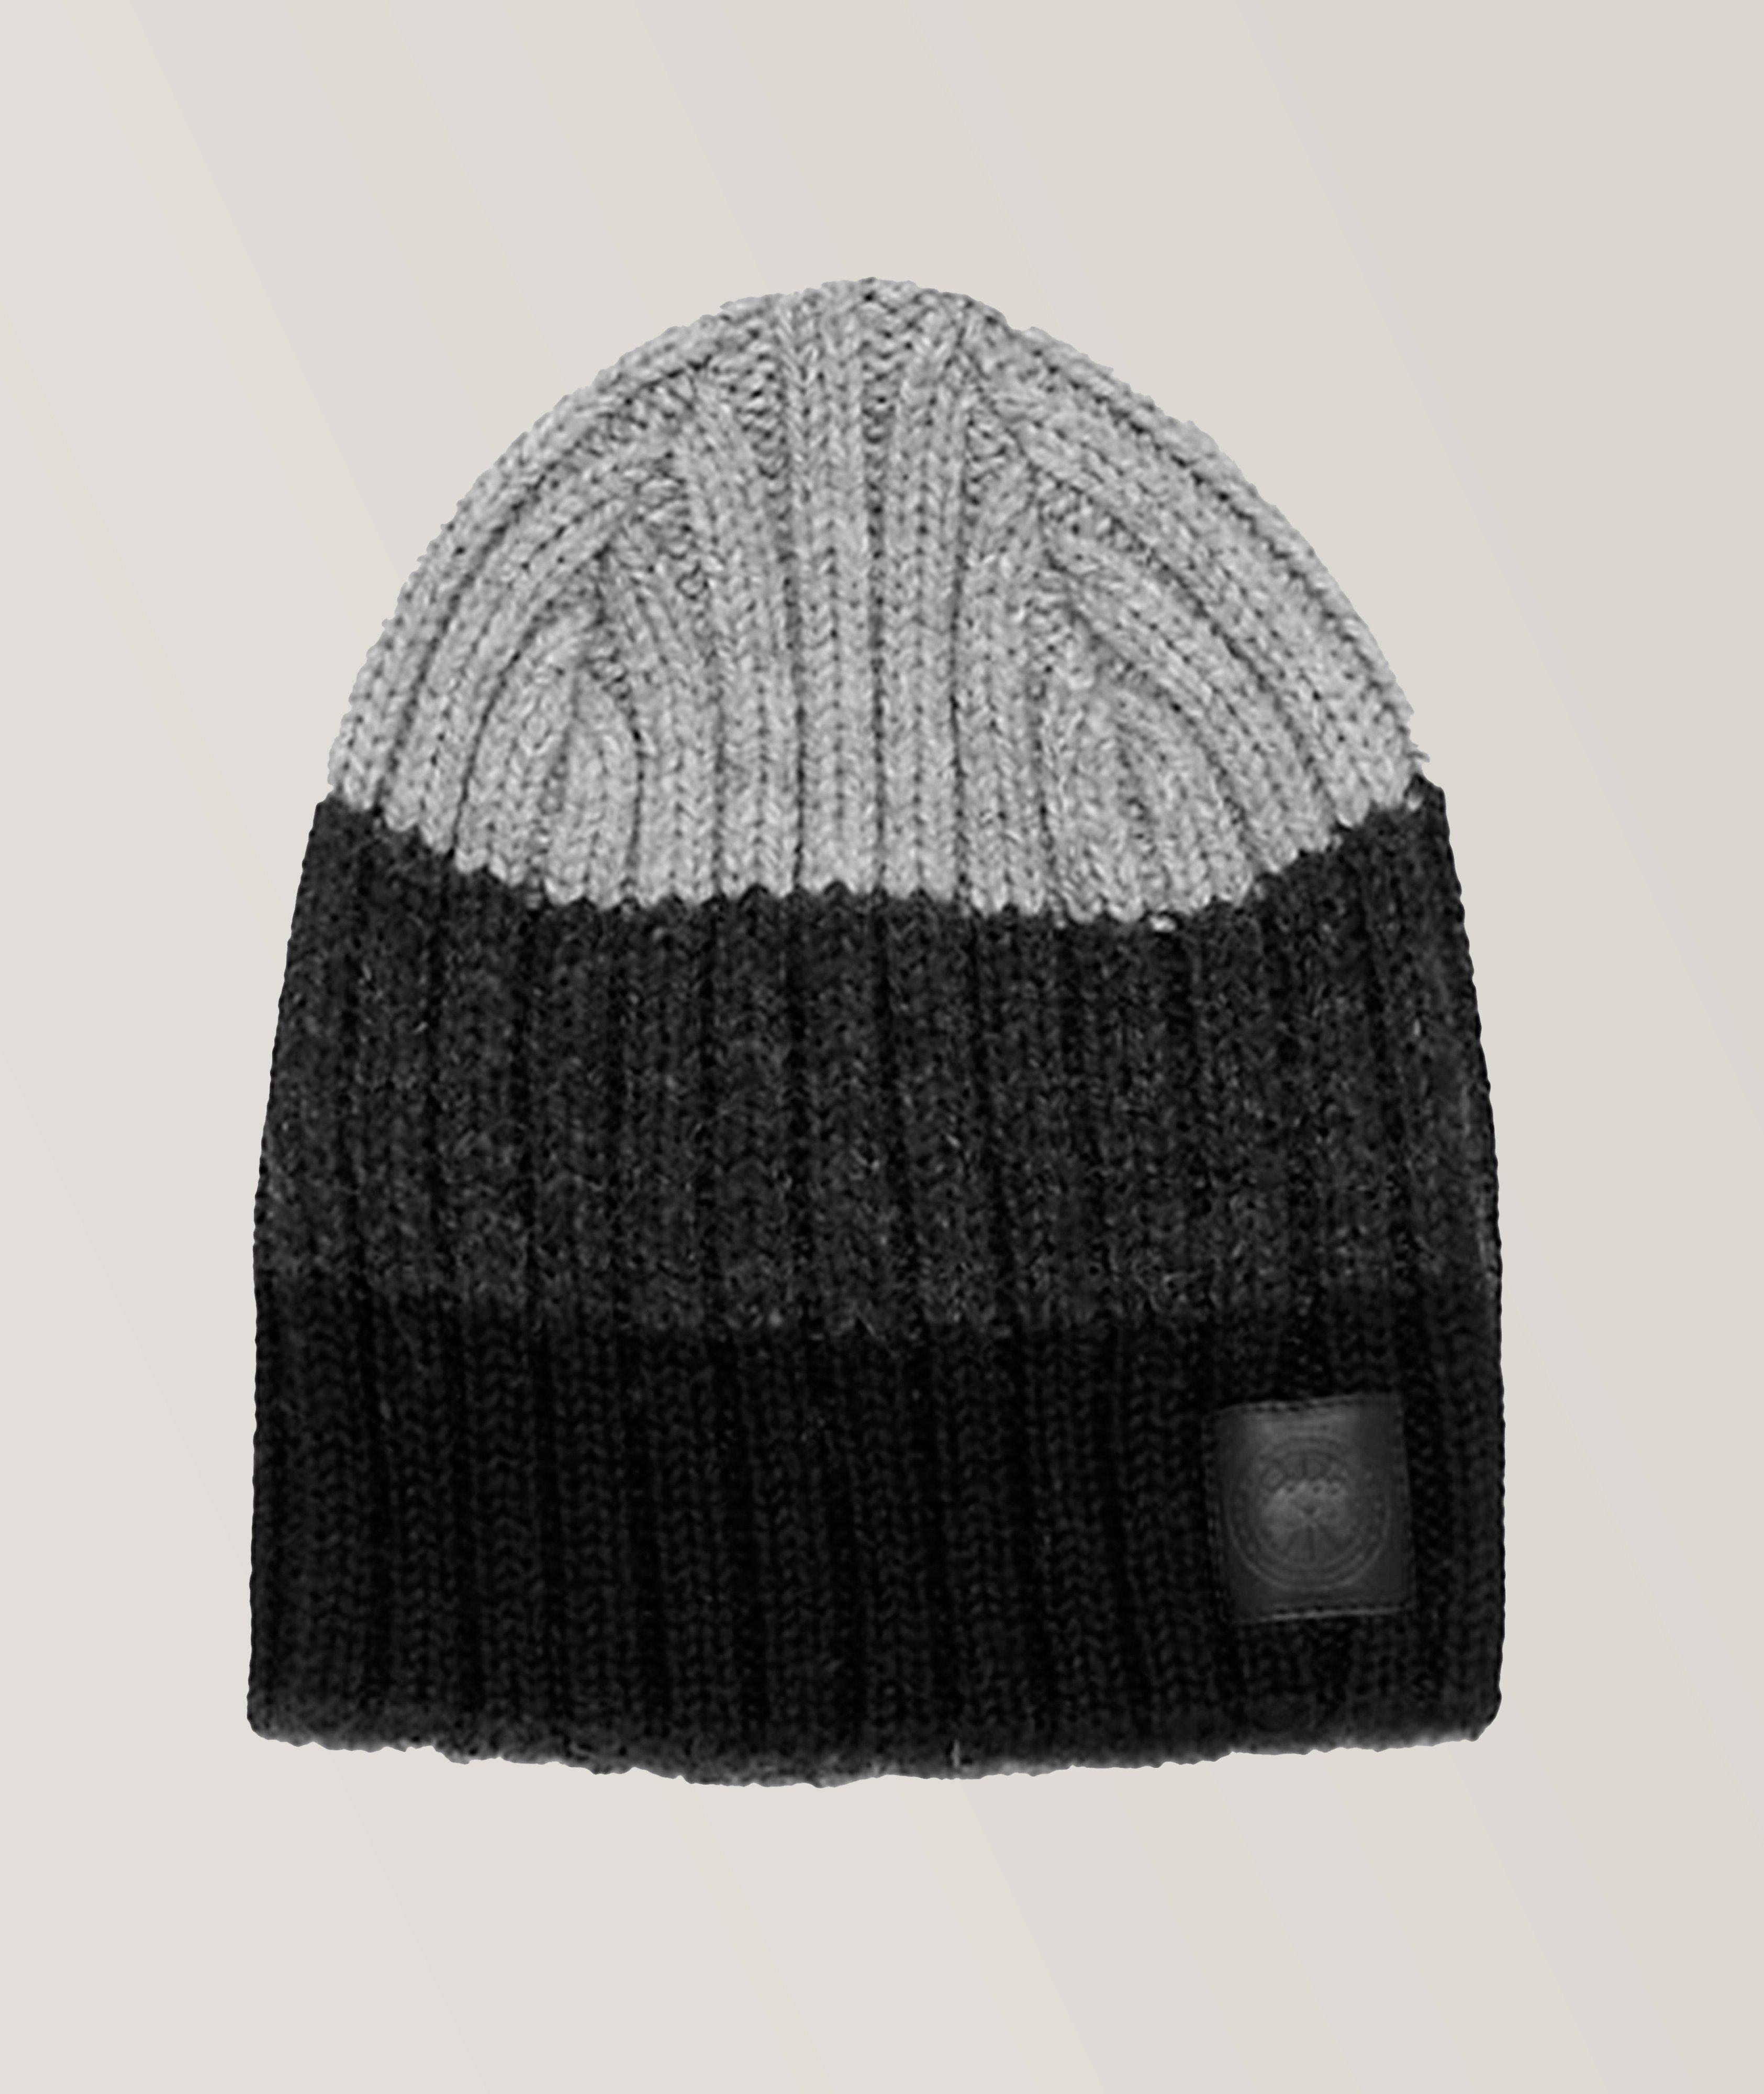 Ribbed Block Slouch Wool Toque image 0